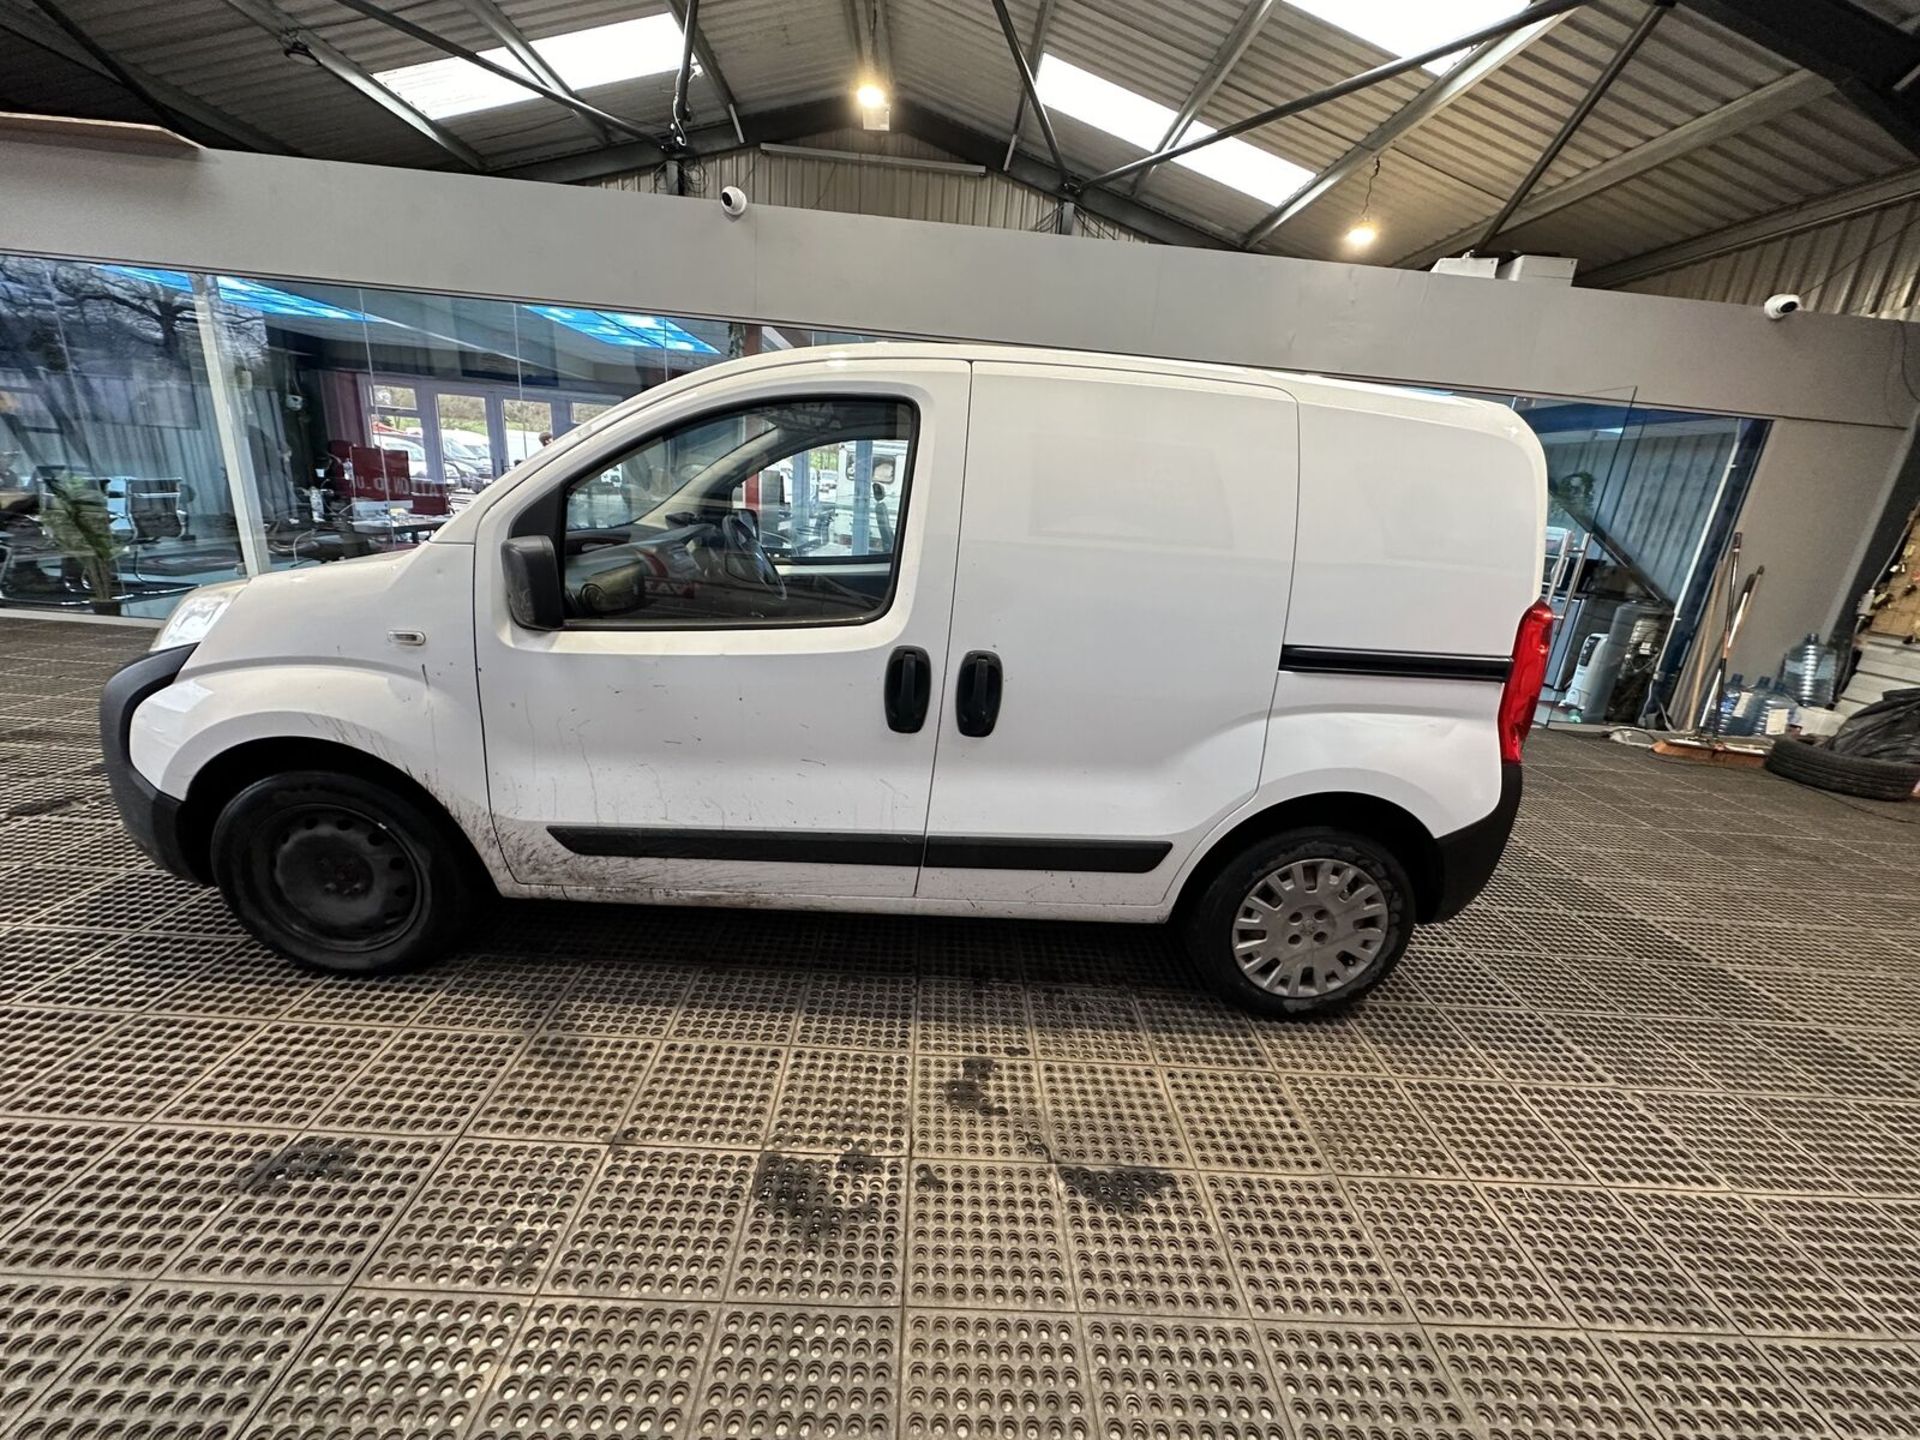 LITTLE WORKHORSE: 65 PLATE PEUGEOT BIPPER DIESEL - READY FOR ACTION >>--NO VAT ON HAMMER--<< - Image 3 of 13